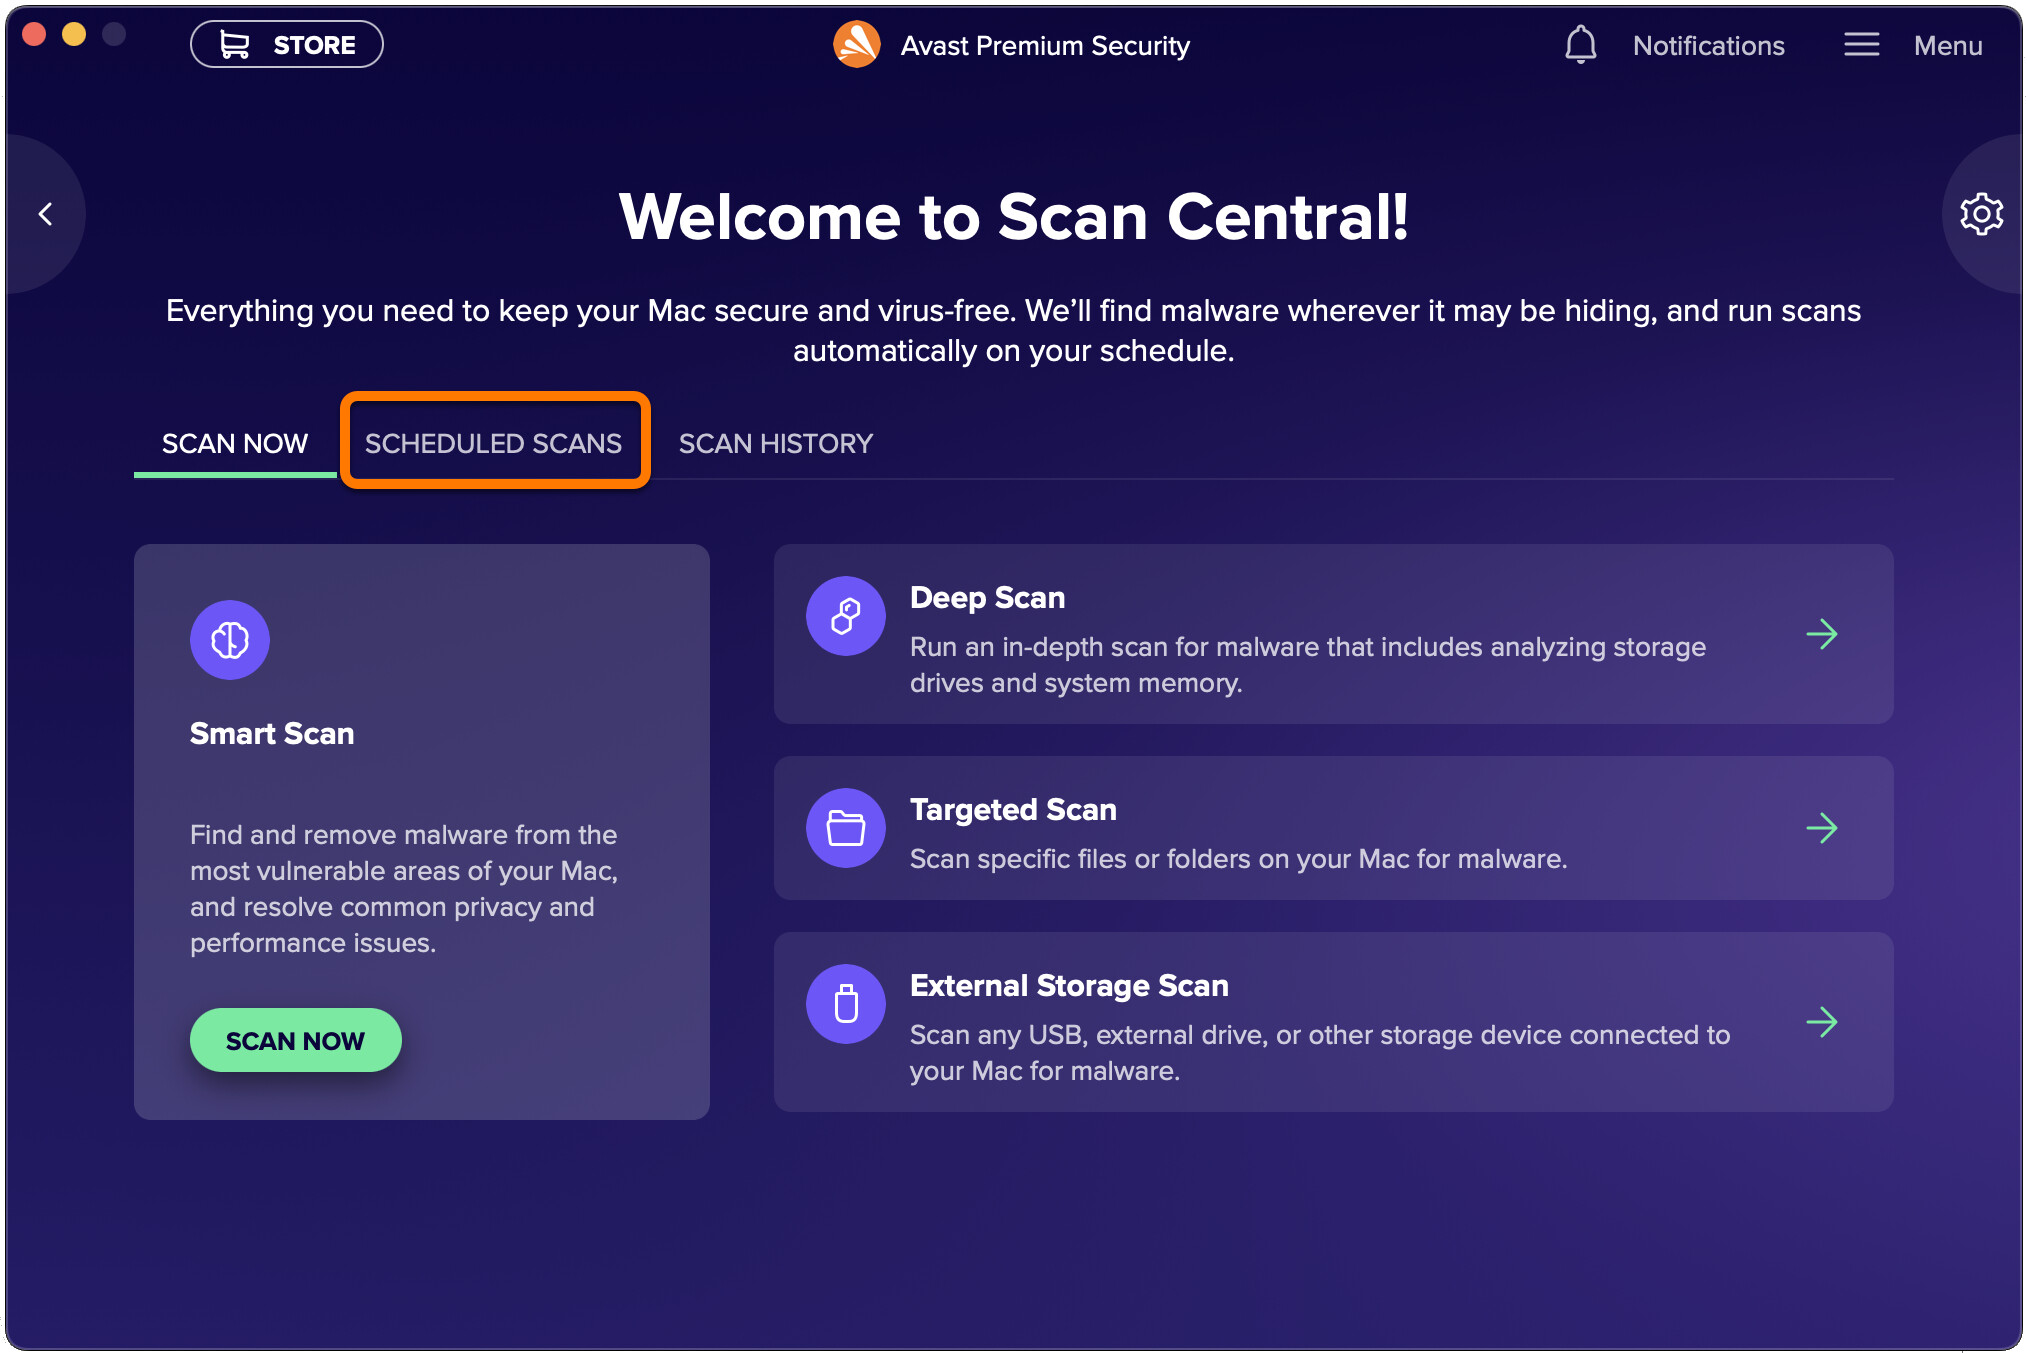 How To Schedule A Scan In Avast Internet Security